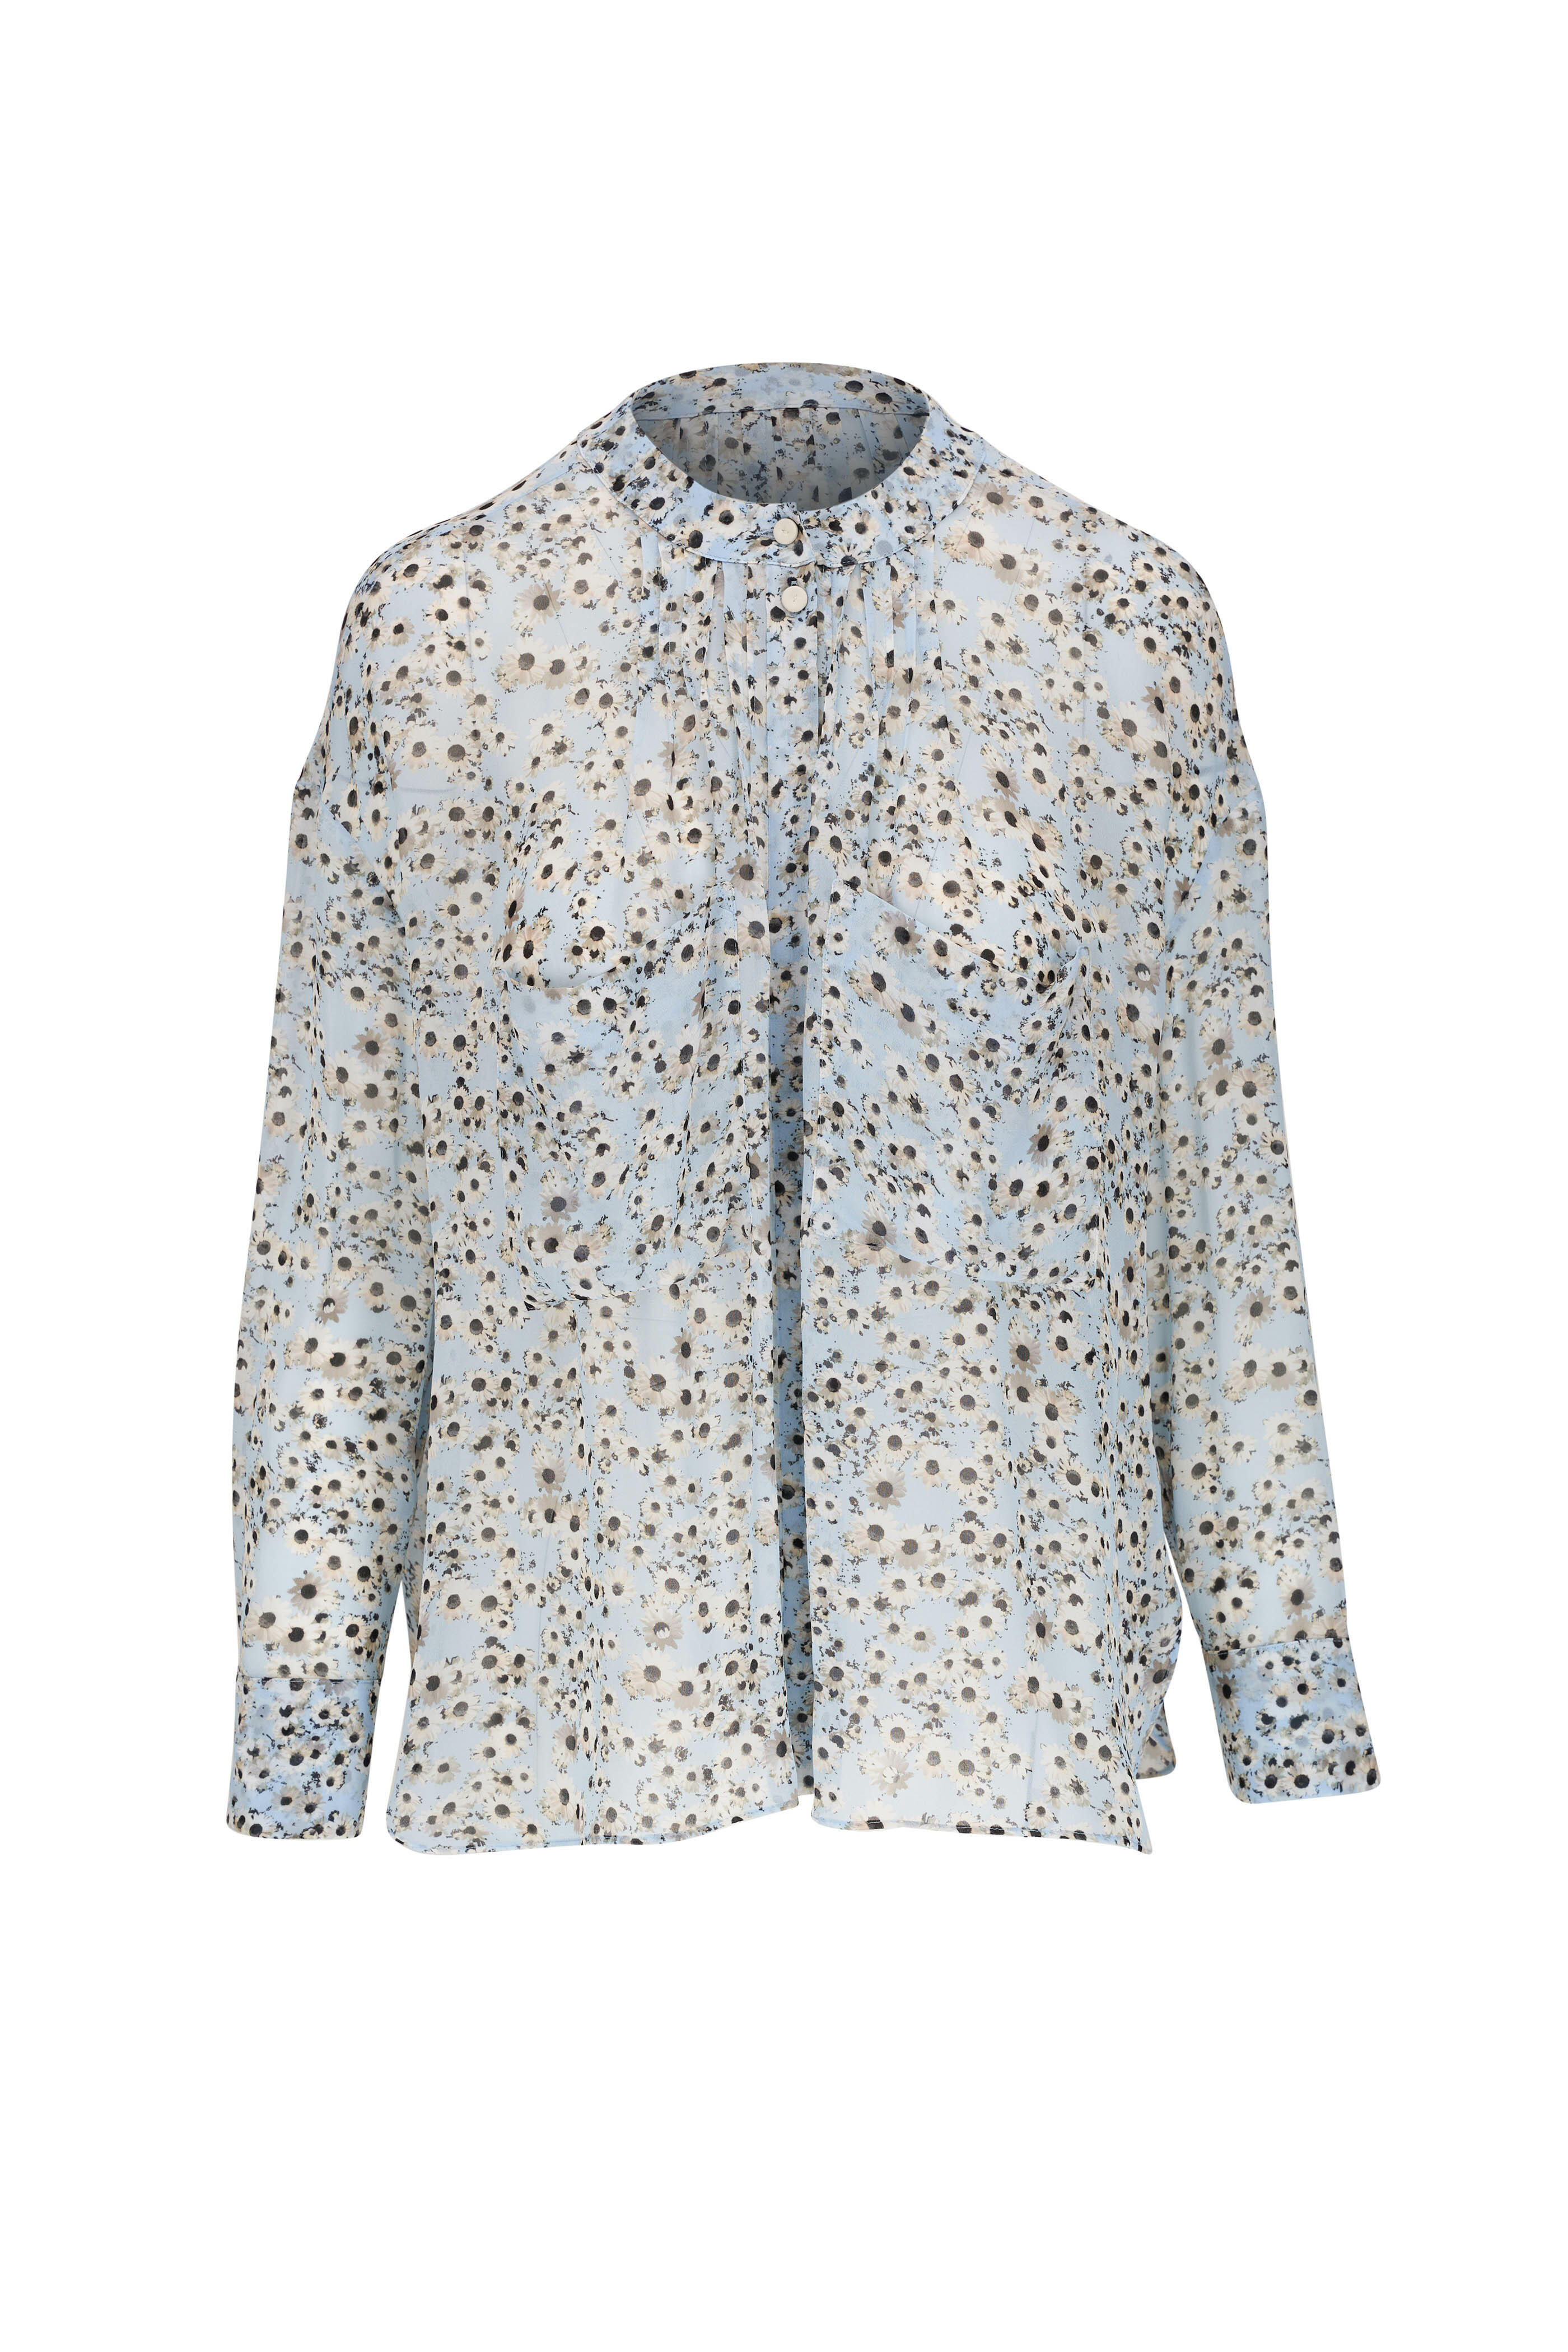 Dorothee Schumacher - Blooming Meadow Blouse | Mitchell Stores